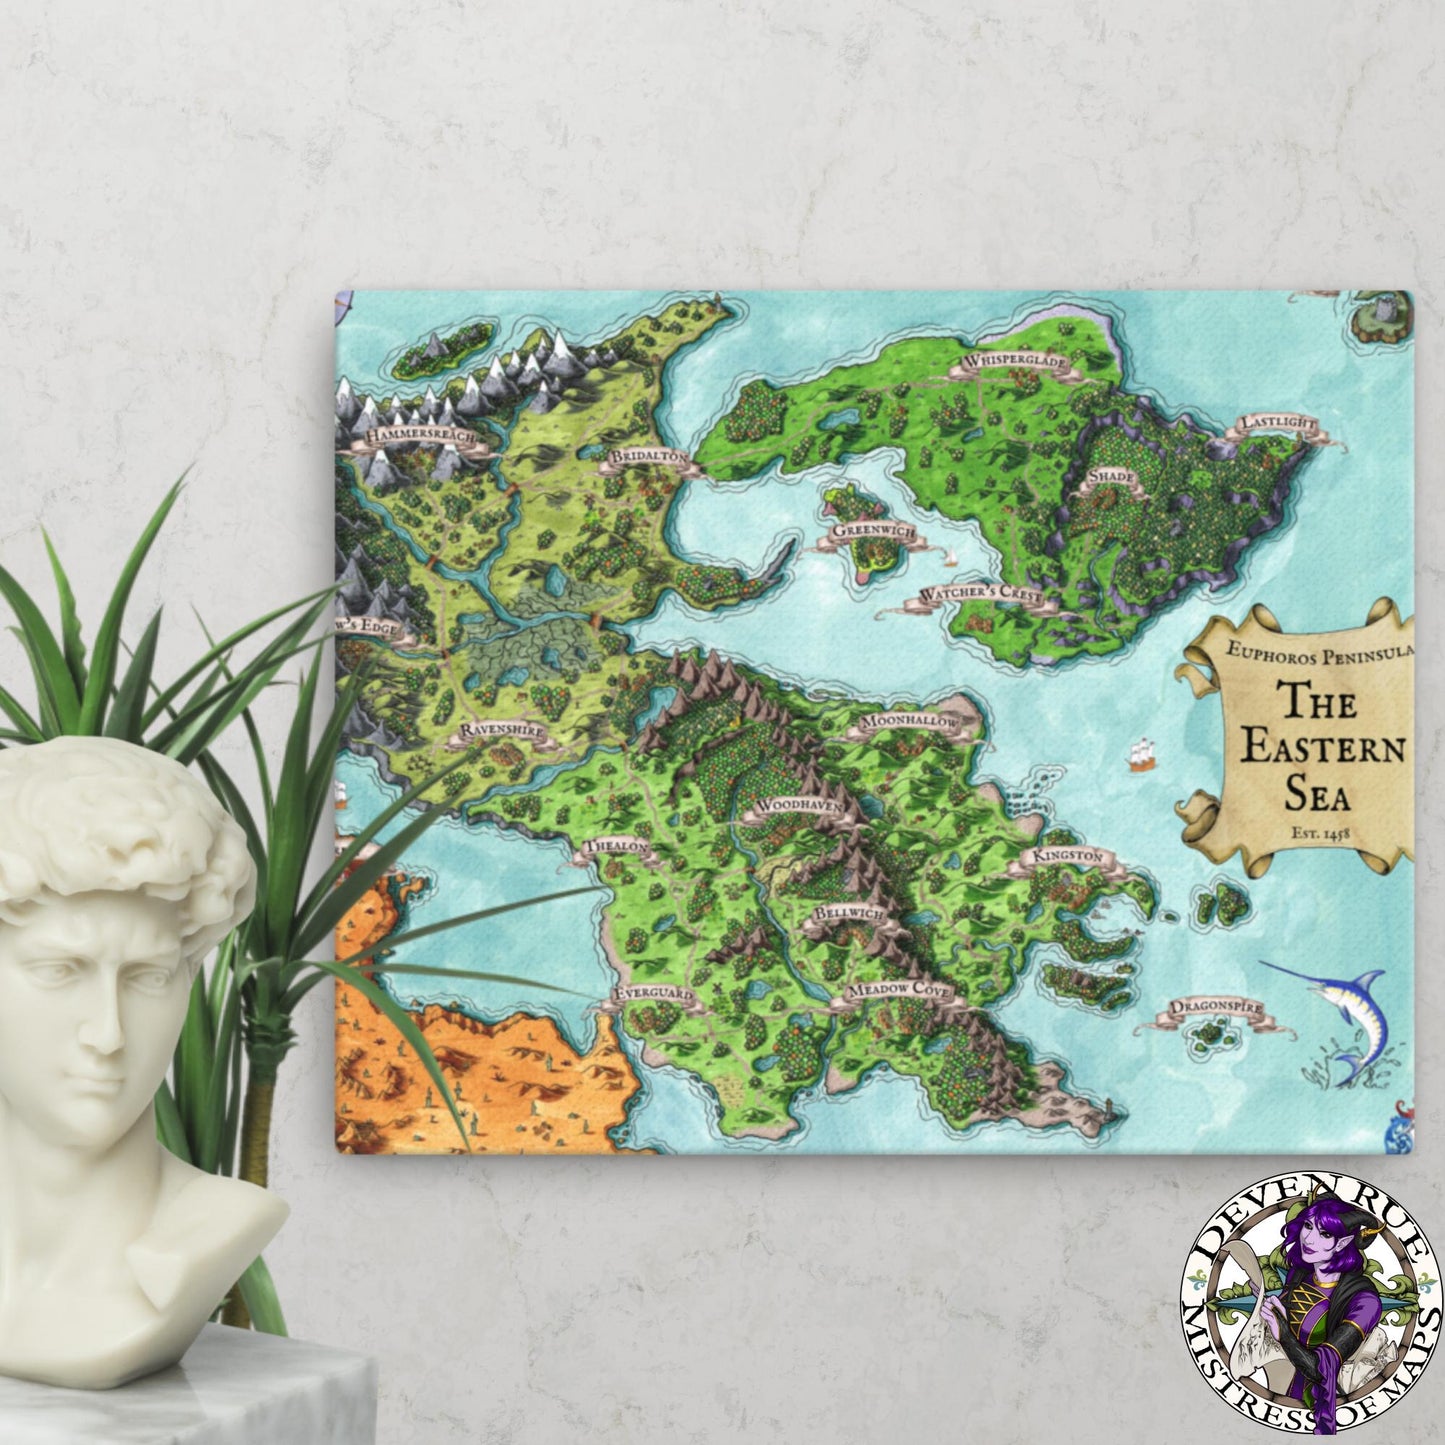 A 16" by 20" canvas print of the Euphoros map by Deven Rue hangs on a wall behind a plant and a bust statue.